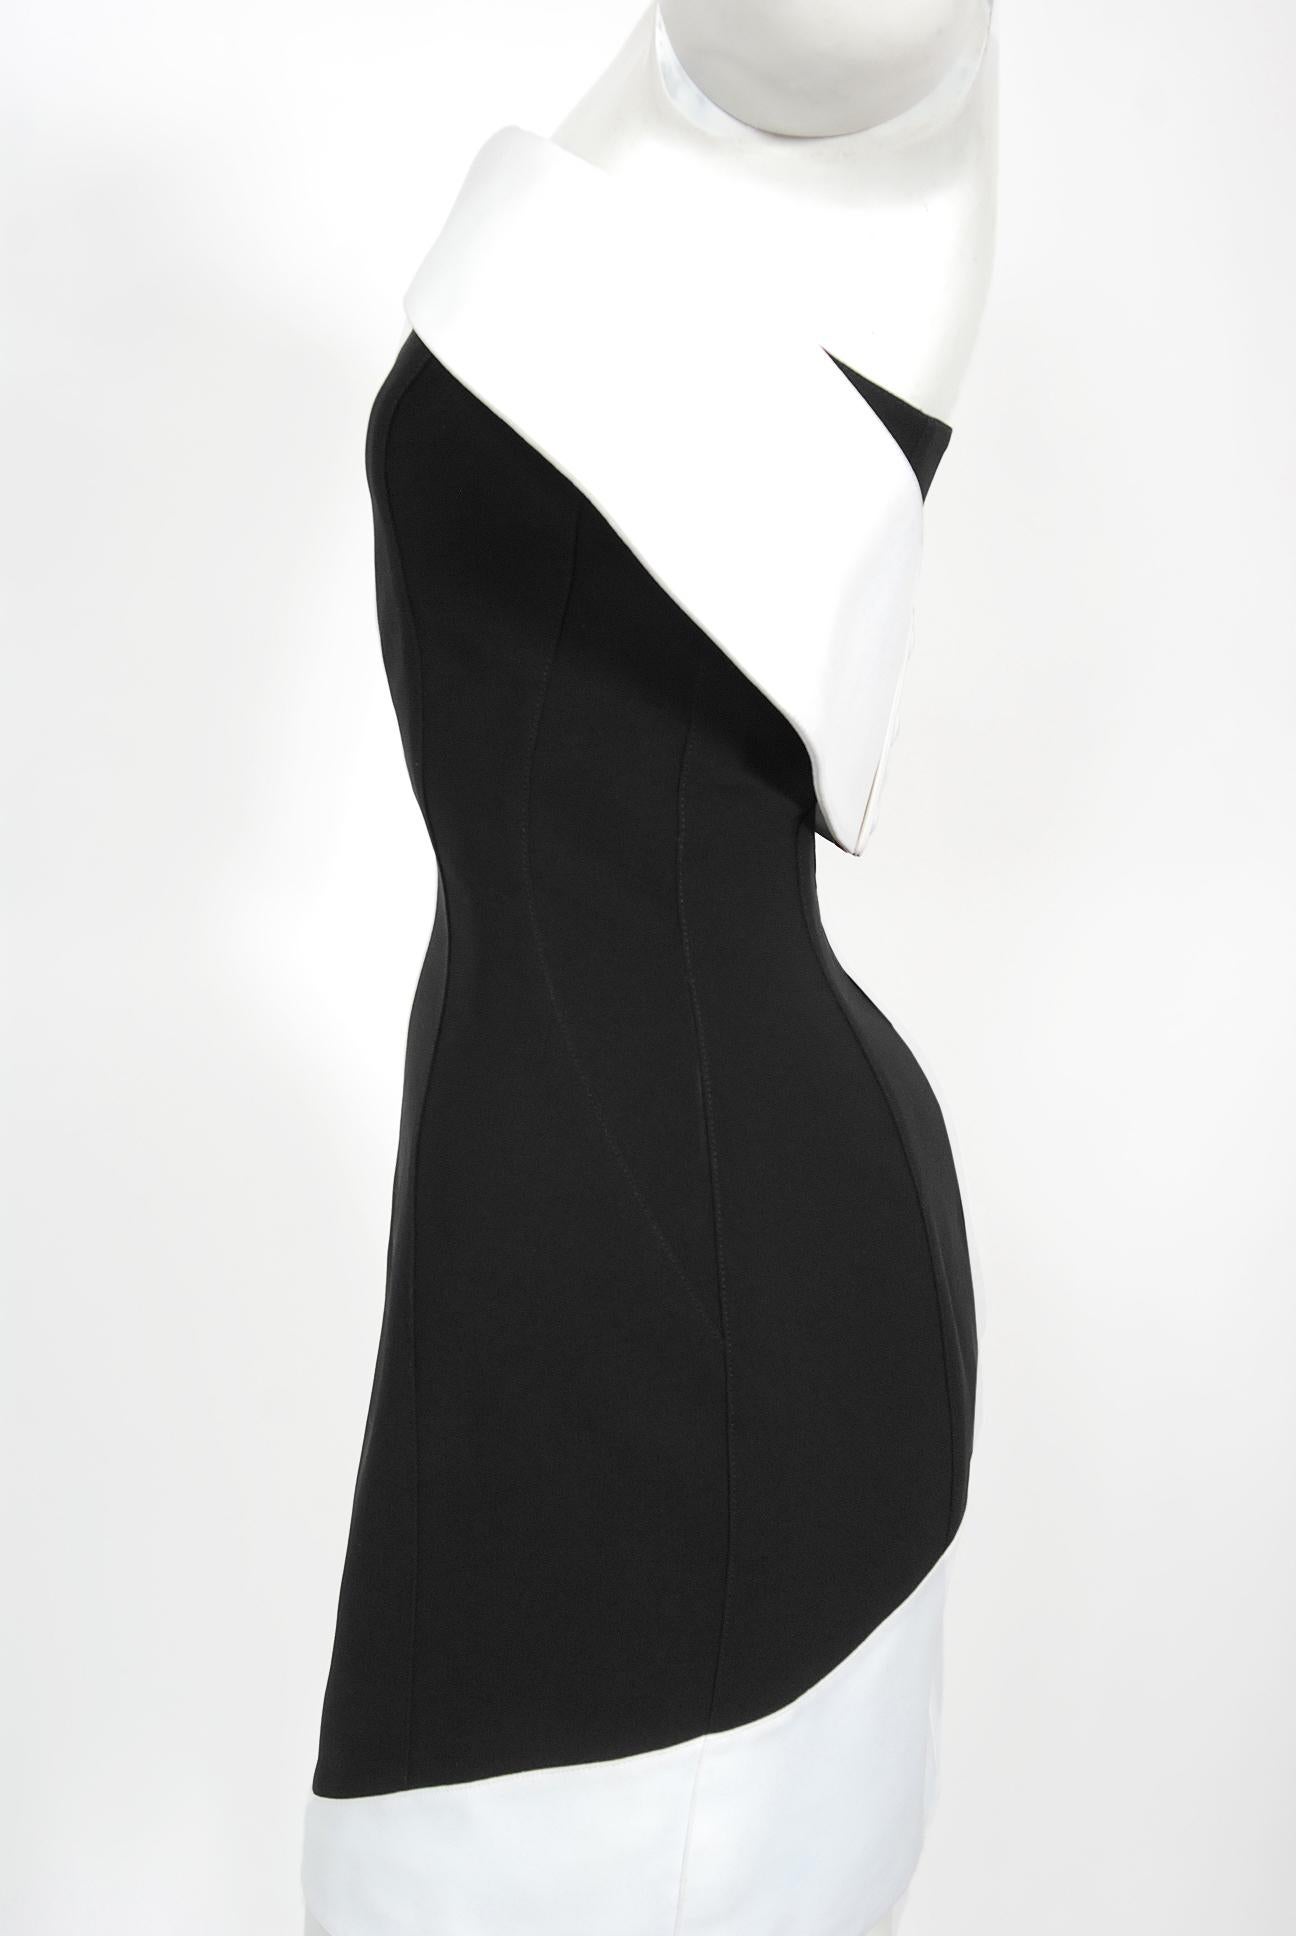 1996 Thierry Mugler Couture Archival Black White Futuristic Strapless Mini Dress In Good Condition For Sale In Beverly Hills, CA